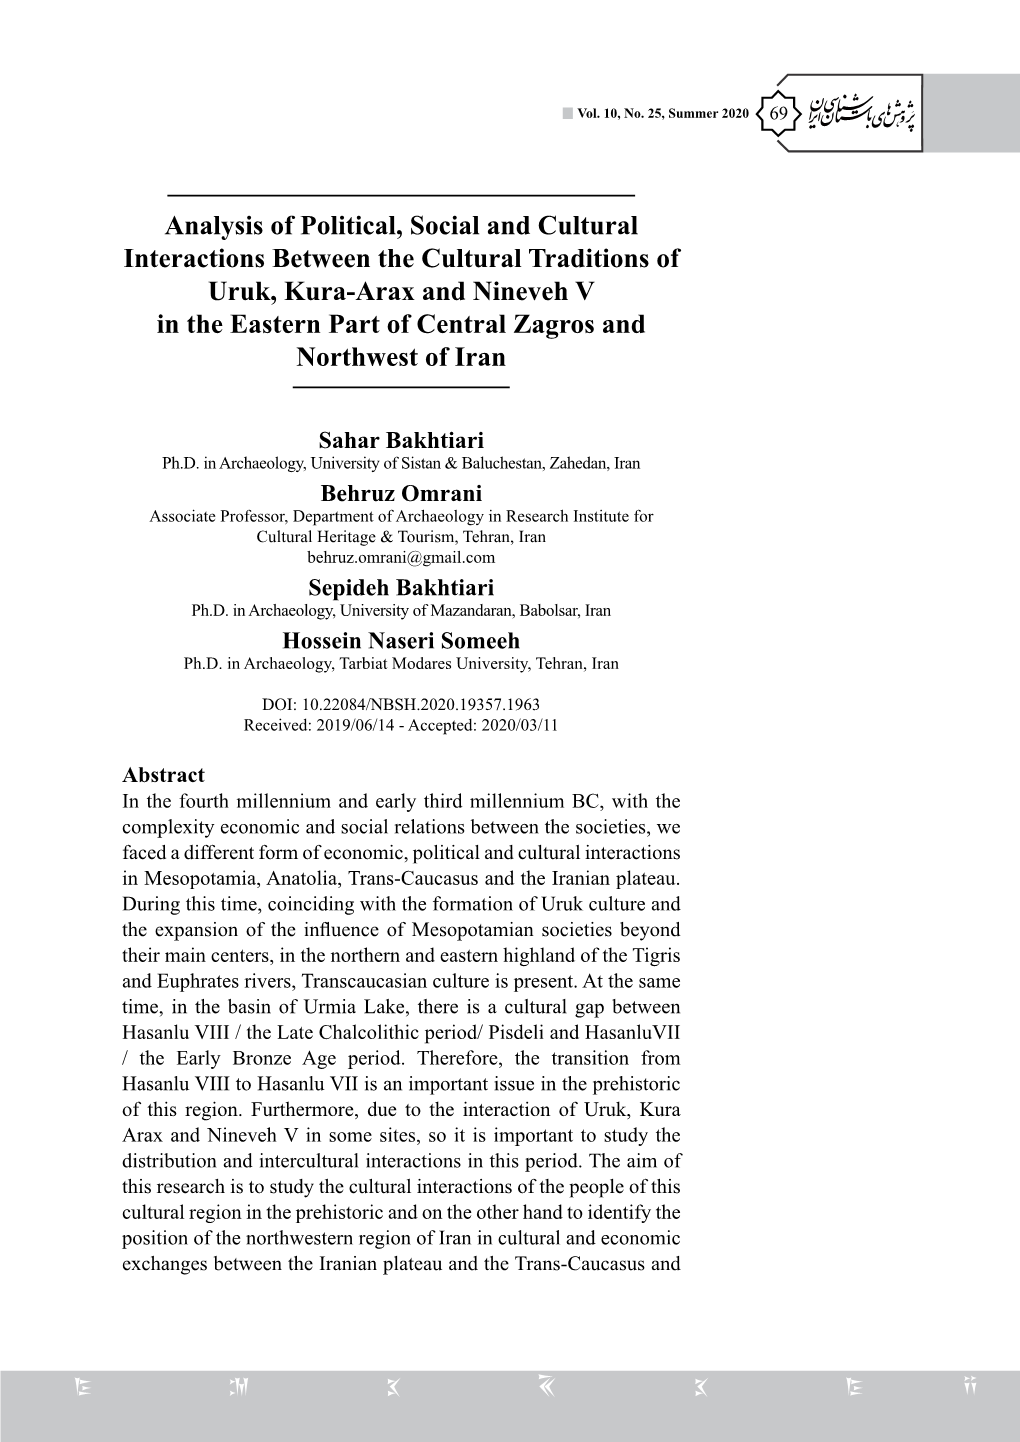 Analysis of Political, Social and Cultural Interactions Between The